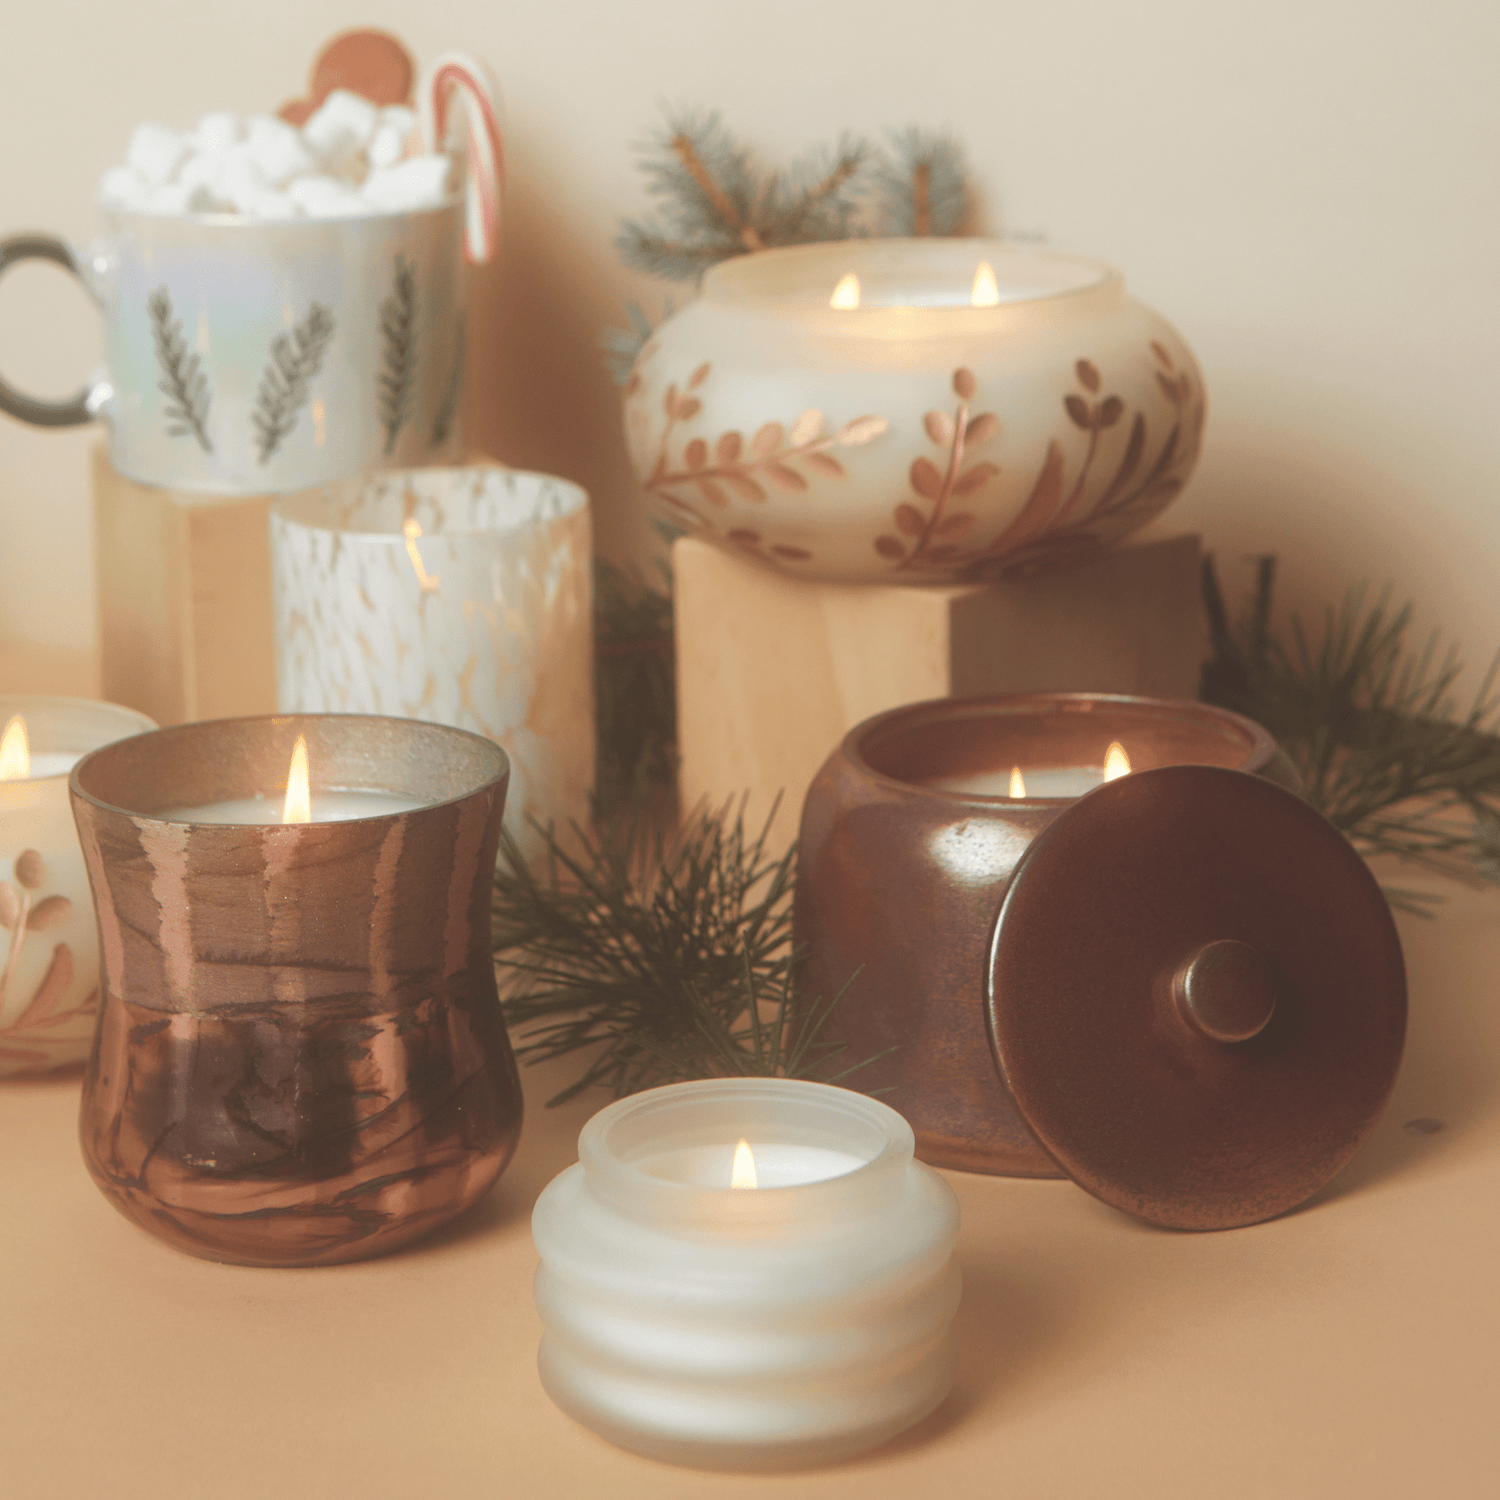 Cypress & Fir Collection of Candles from Paddywax